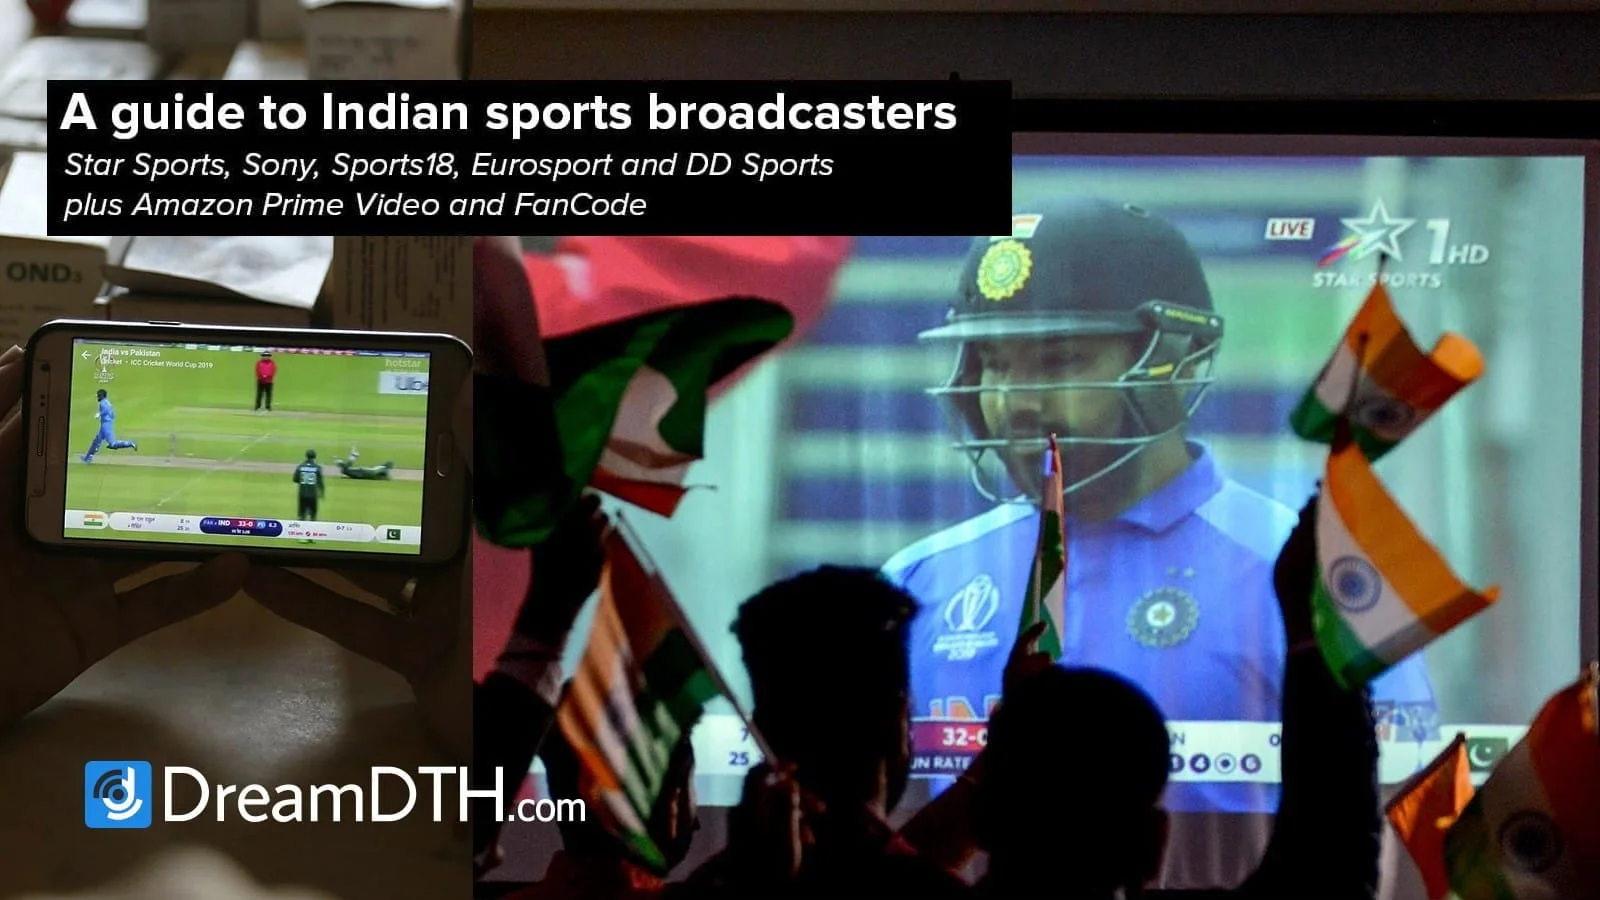 DreamDTH Explains A comprehensive guide to sports channels in India